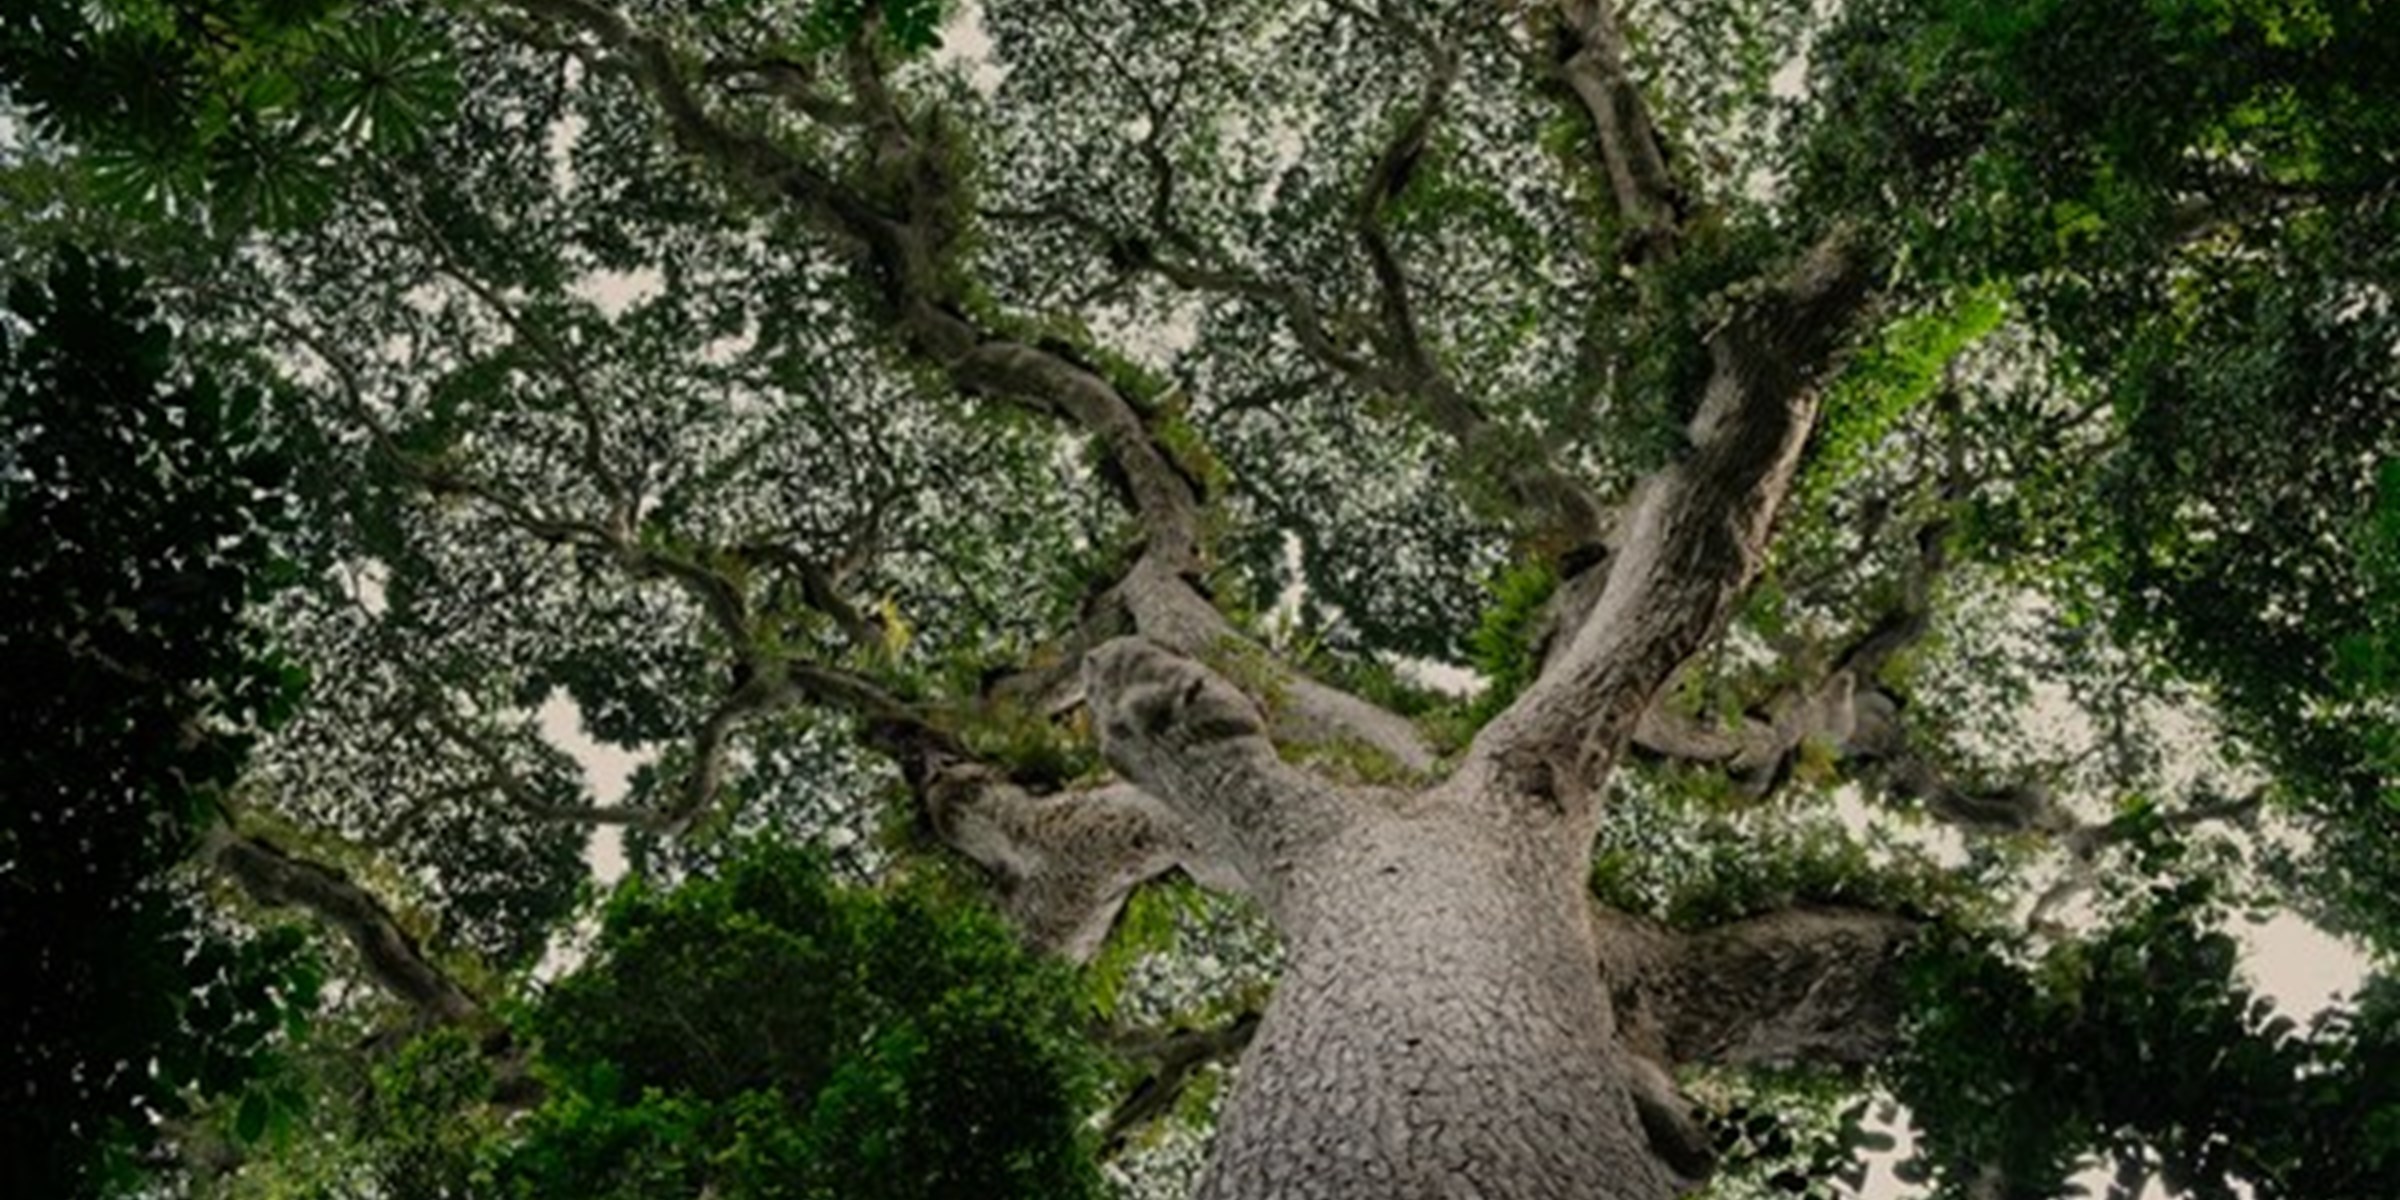 The intelligence and resilience of Trees